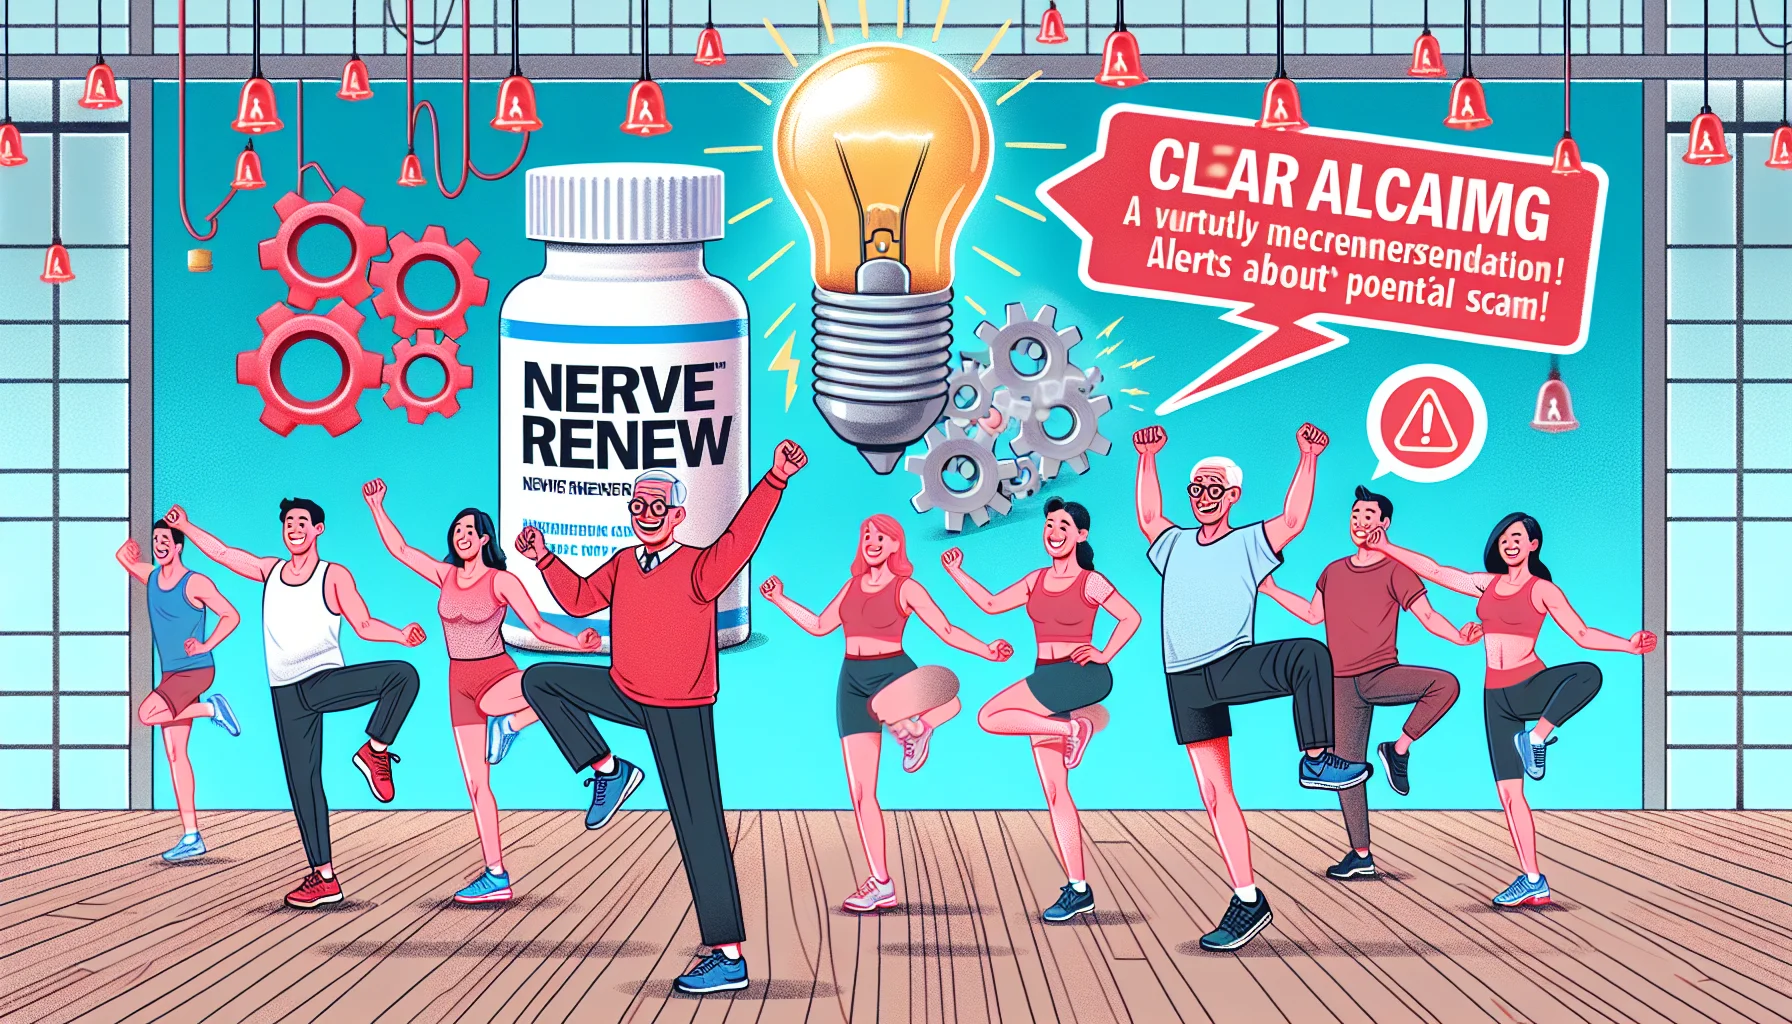 Design a humorous and realistic scenario that illustrates understanding of a product named Nerve Renew and alerts about potential scams. In the foreground, include a group of individuals exercising with jovial expressions. They should represent a balanced mix of genders and descents including Caucasian, Hispanic, and South-Asian. Incorporate elements that symbolize clear comprehension like light bulbs or gears. Also, subtly integrate red alarm bells or warning signs into the background to indicate scam alerts. The whole setting should refer to the product 'Nerve Renew' without showcasing anything suspicious or potentially fraudulent.